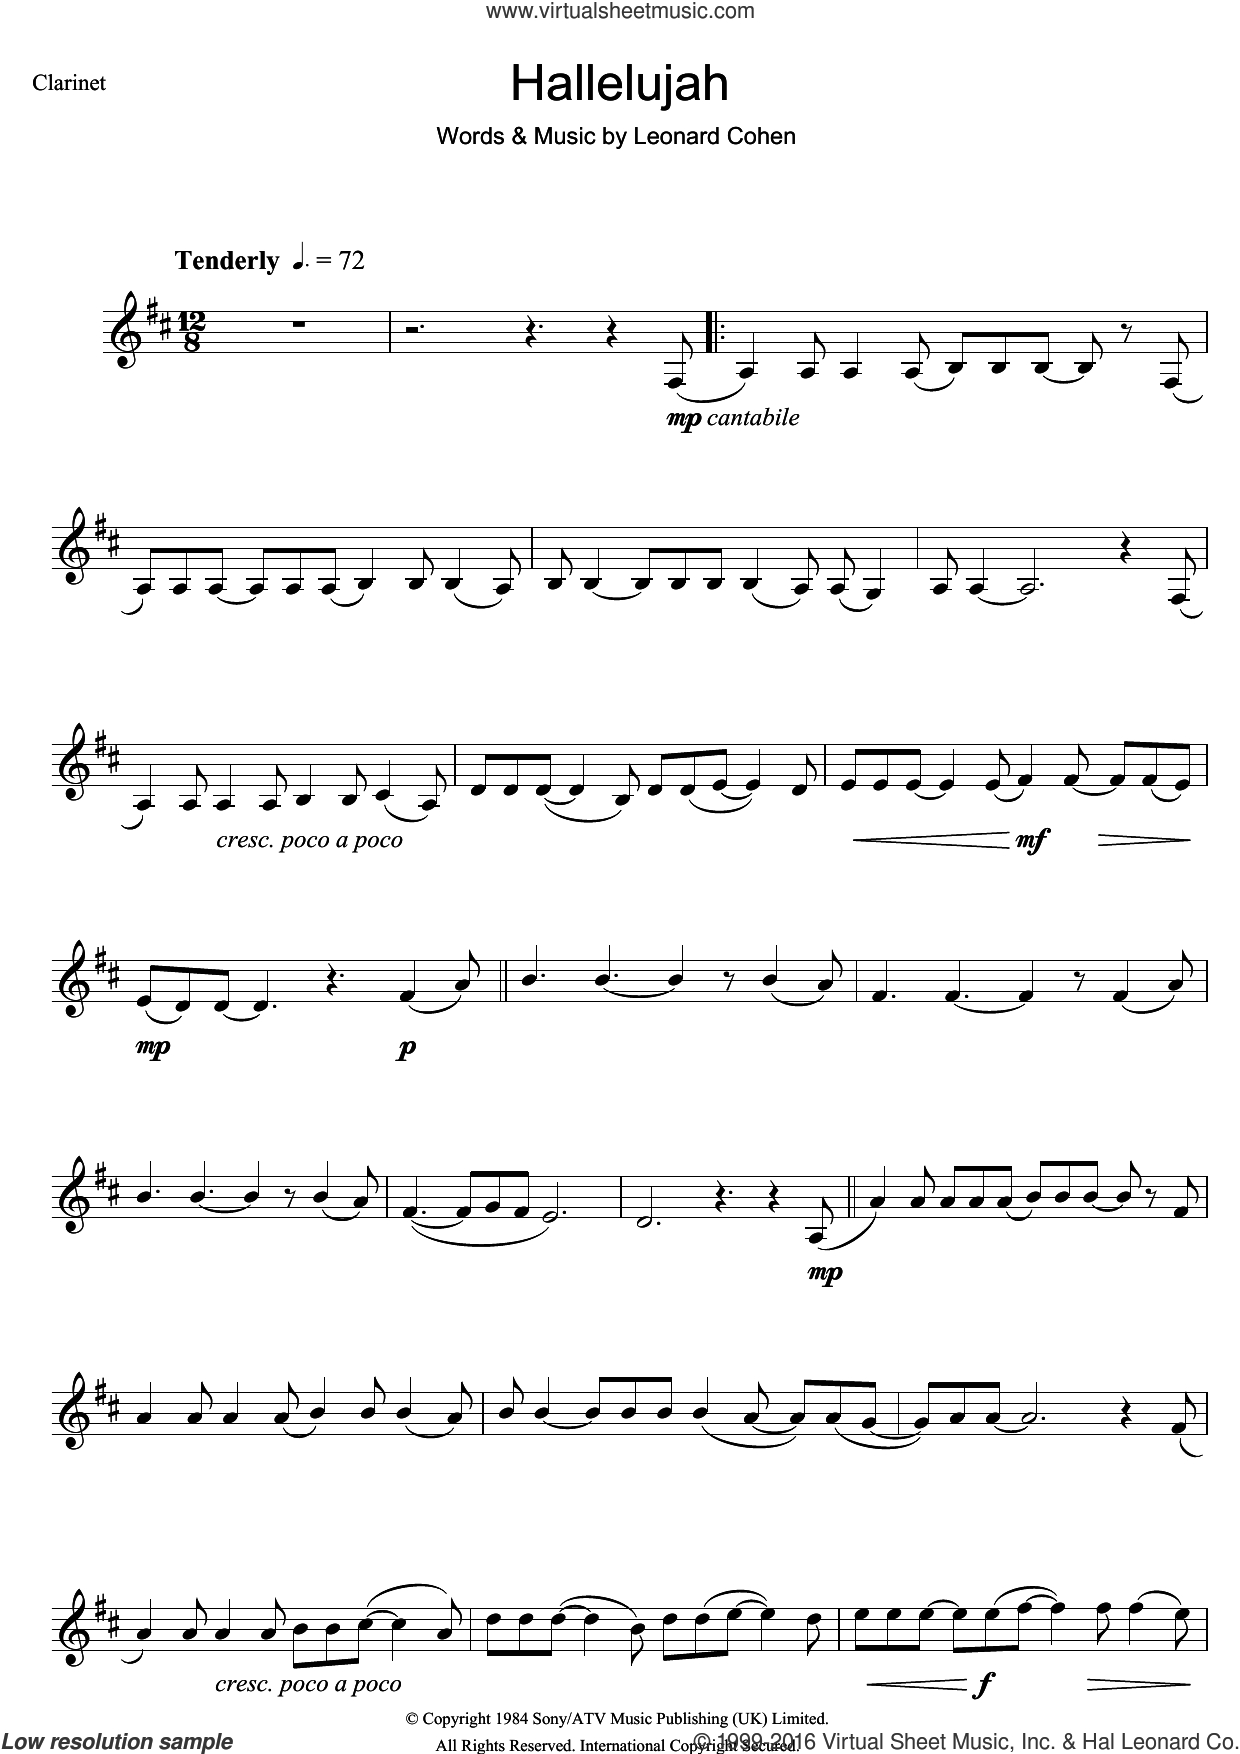 free-printable-piano-sheet-music-for-hallelujah-by-leonard-cohen-free